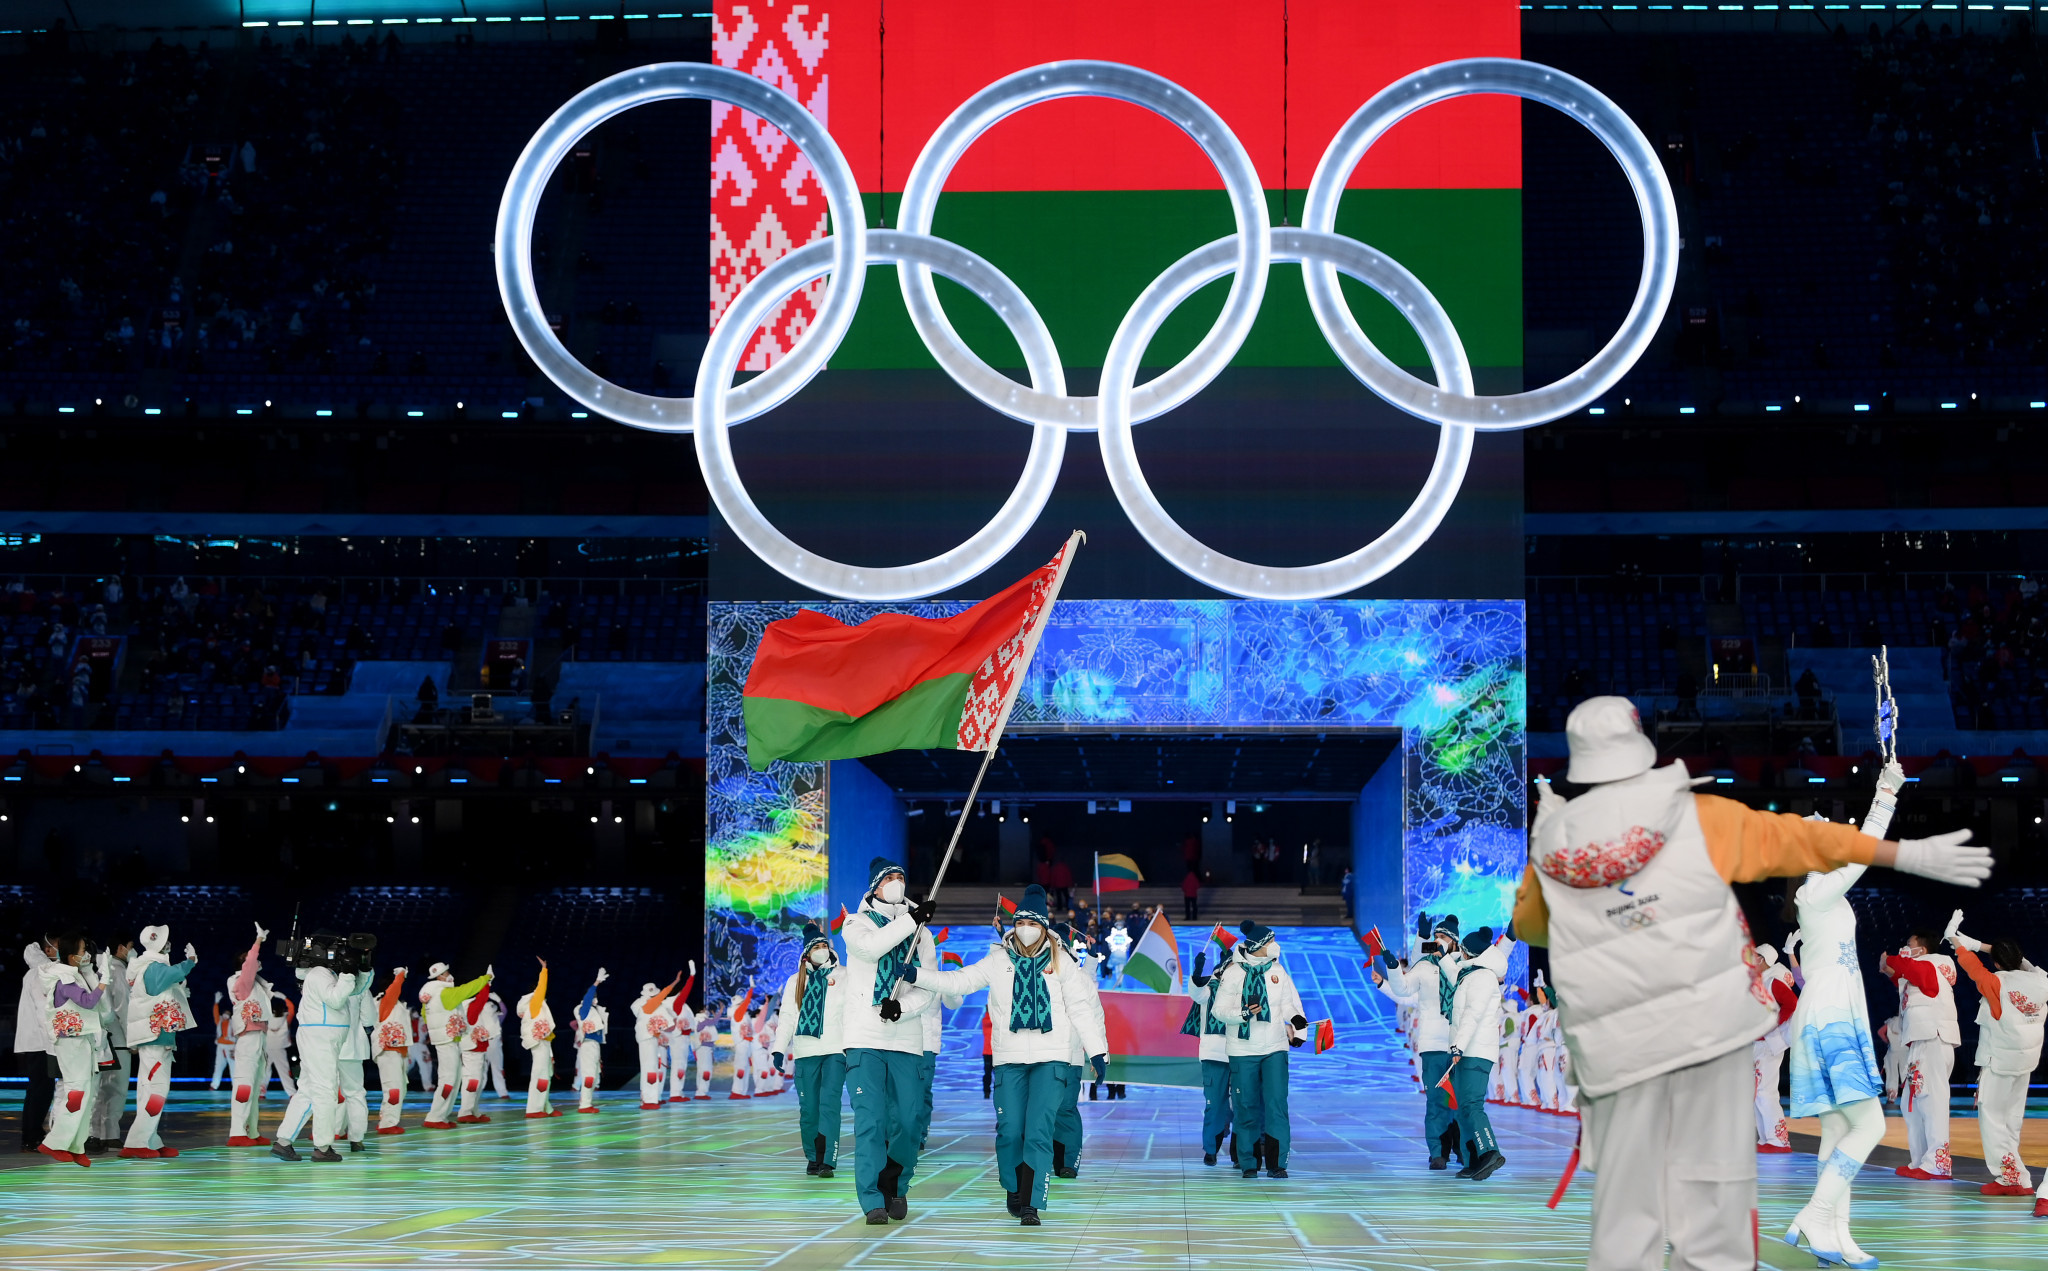 NOCRB President claims "slight warming" of sporting attitudes towards Belarus and Russia